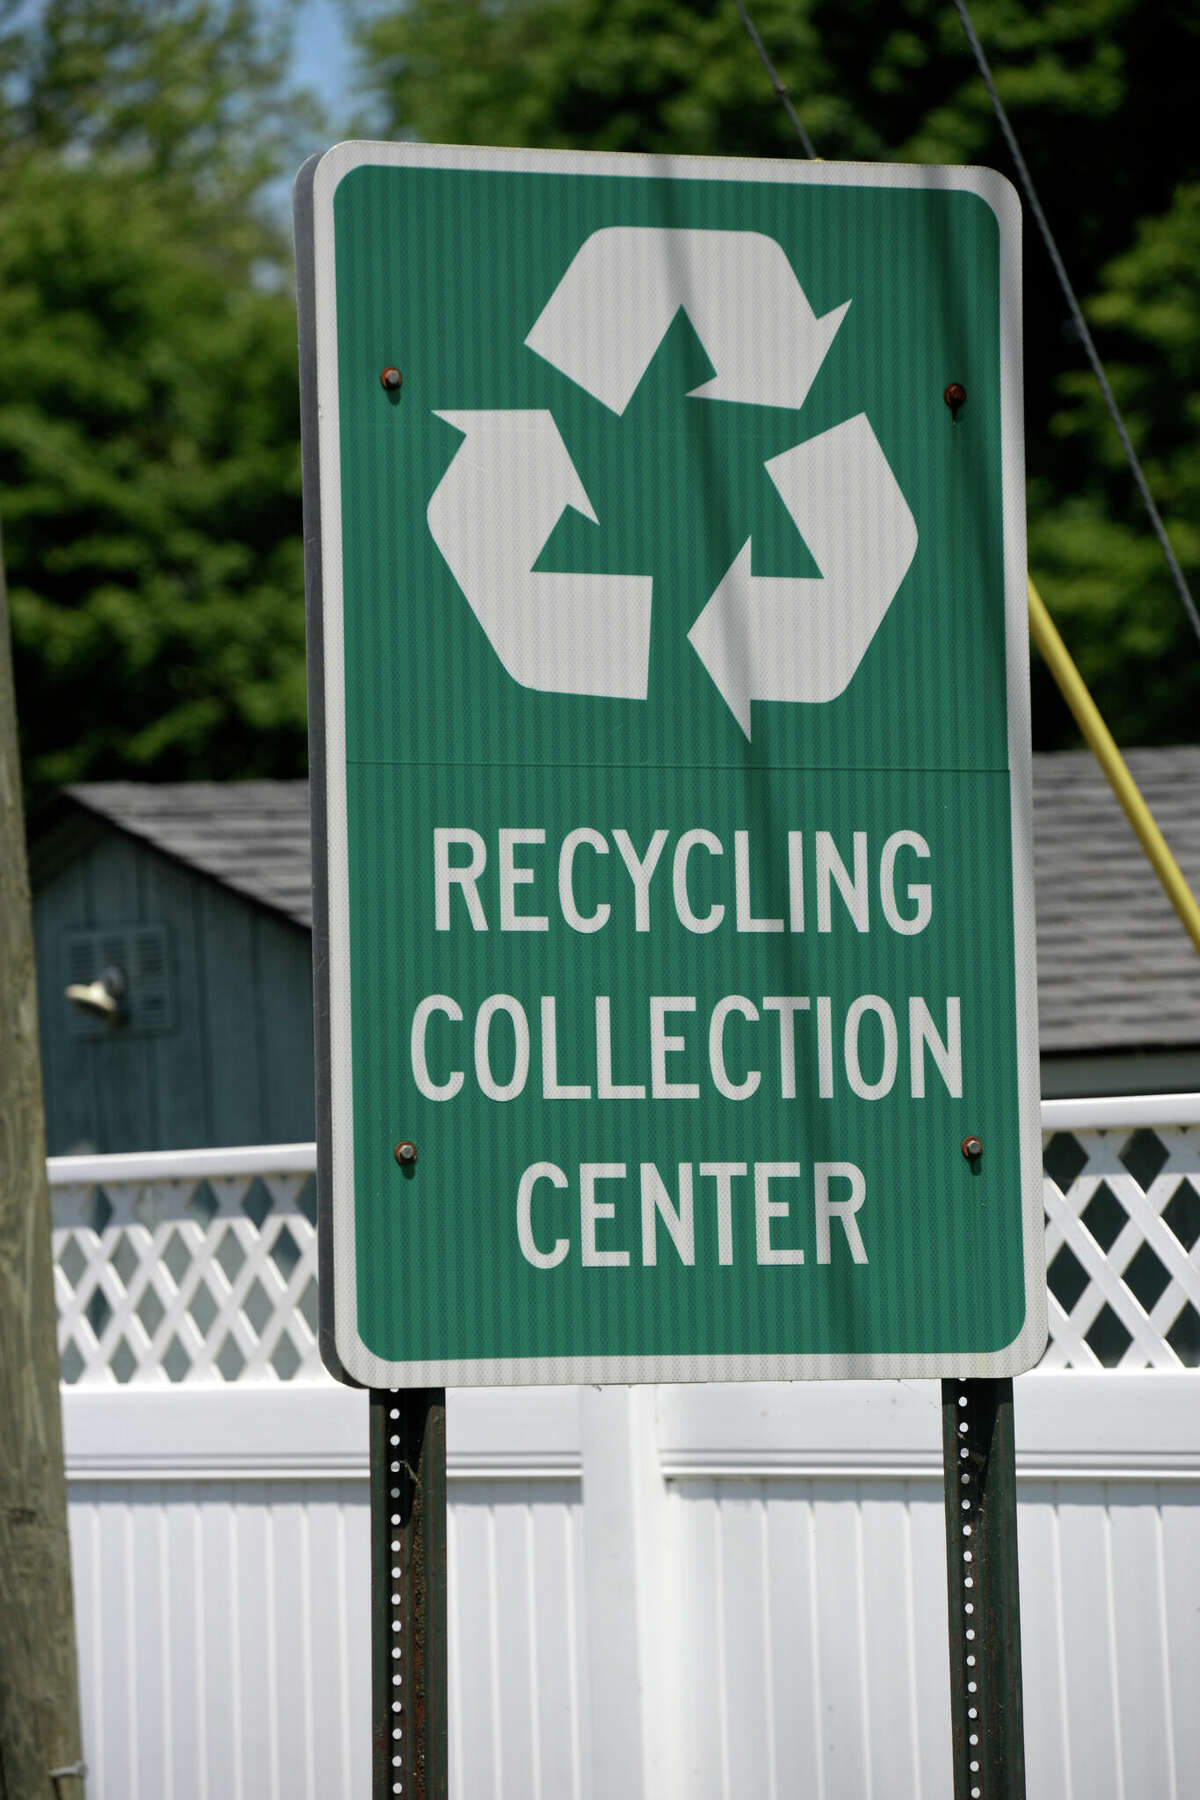 To help subsidize the town's bulky waste returns, Robert Hanna of the New Milford Recycling Center proposed offering primary residents that own a home in New Milford a coupon up to $20 off their bulky waste items.